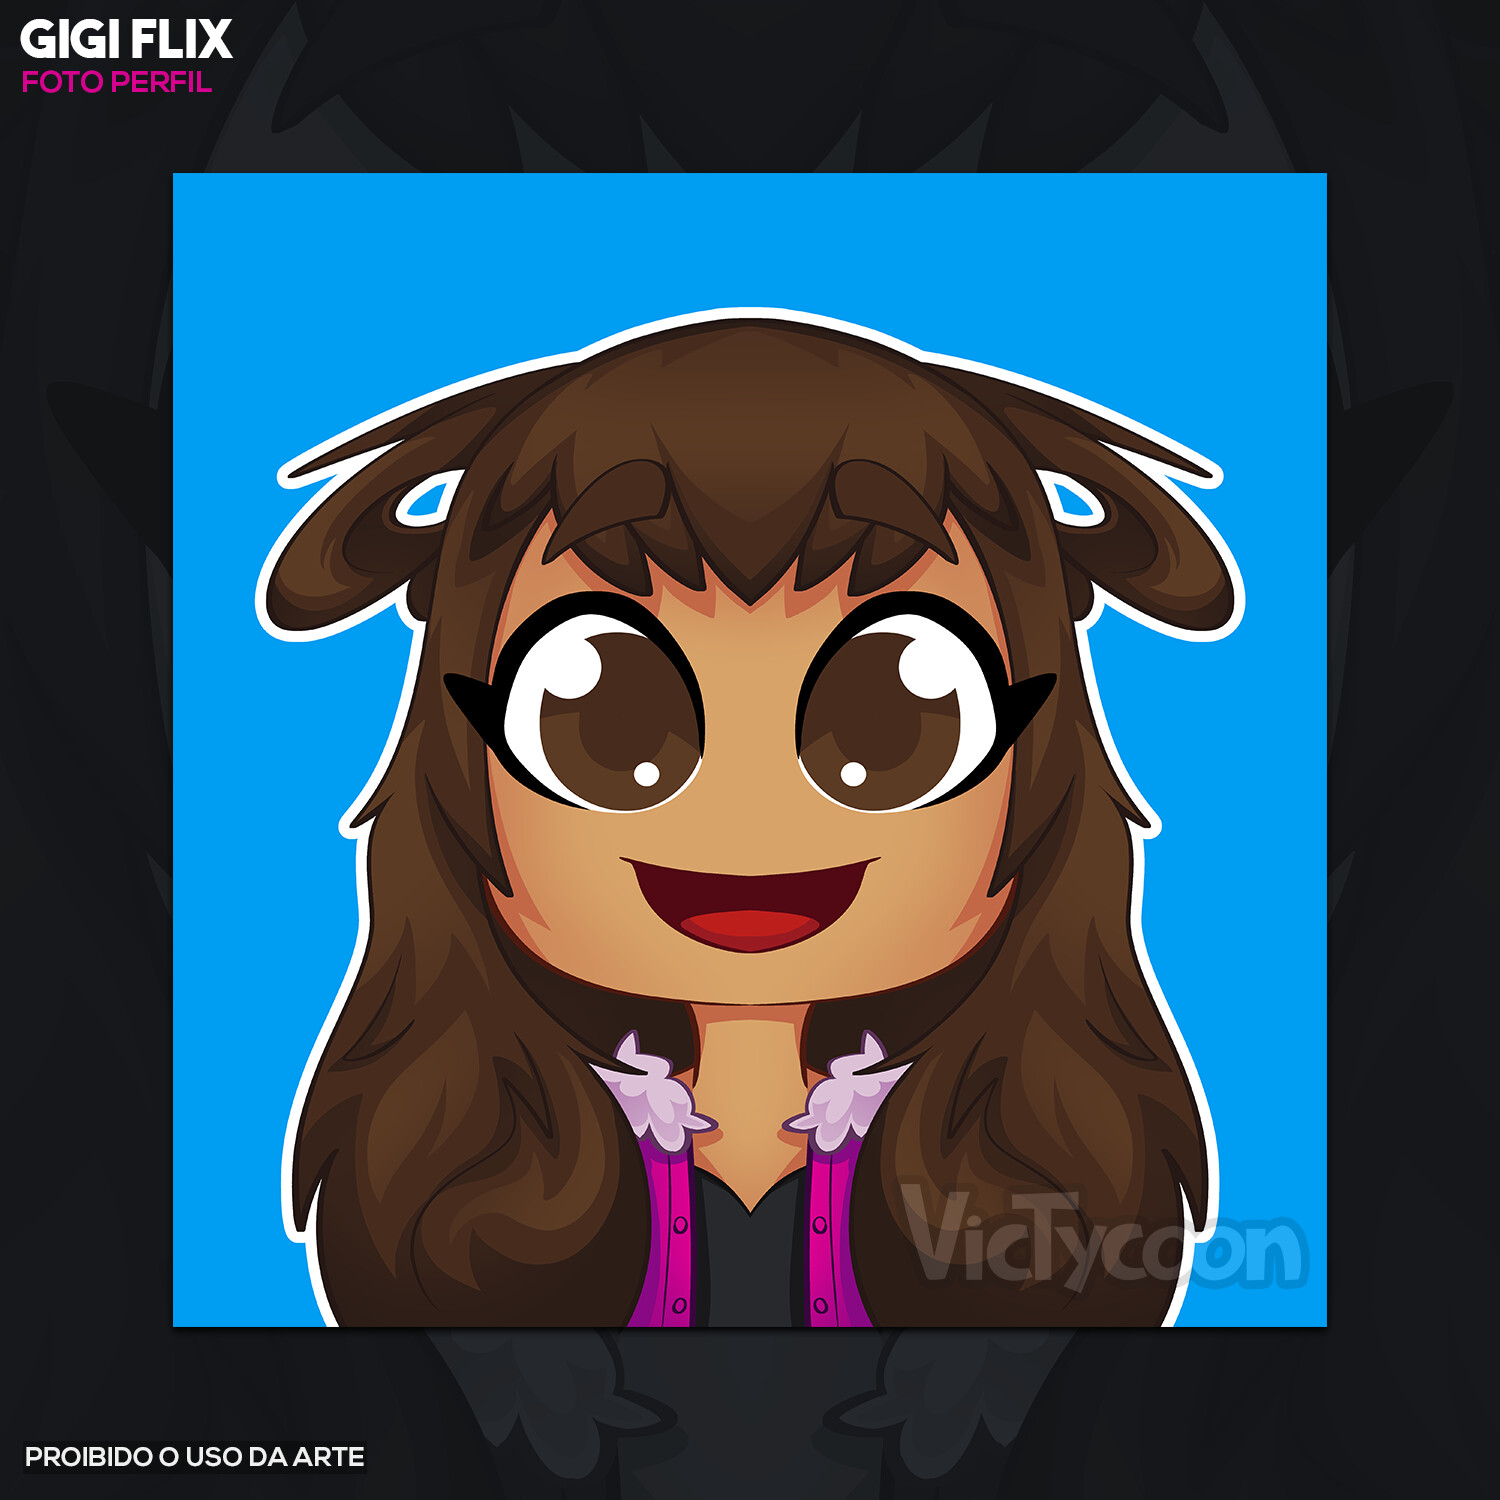 FOTO PERFIL - Lilly Blox (Canal Infantil Roblox) by VicTycoon on